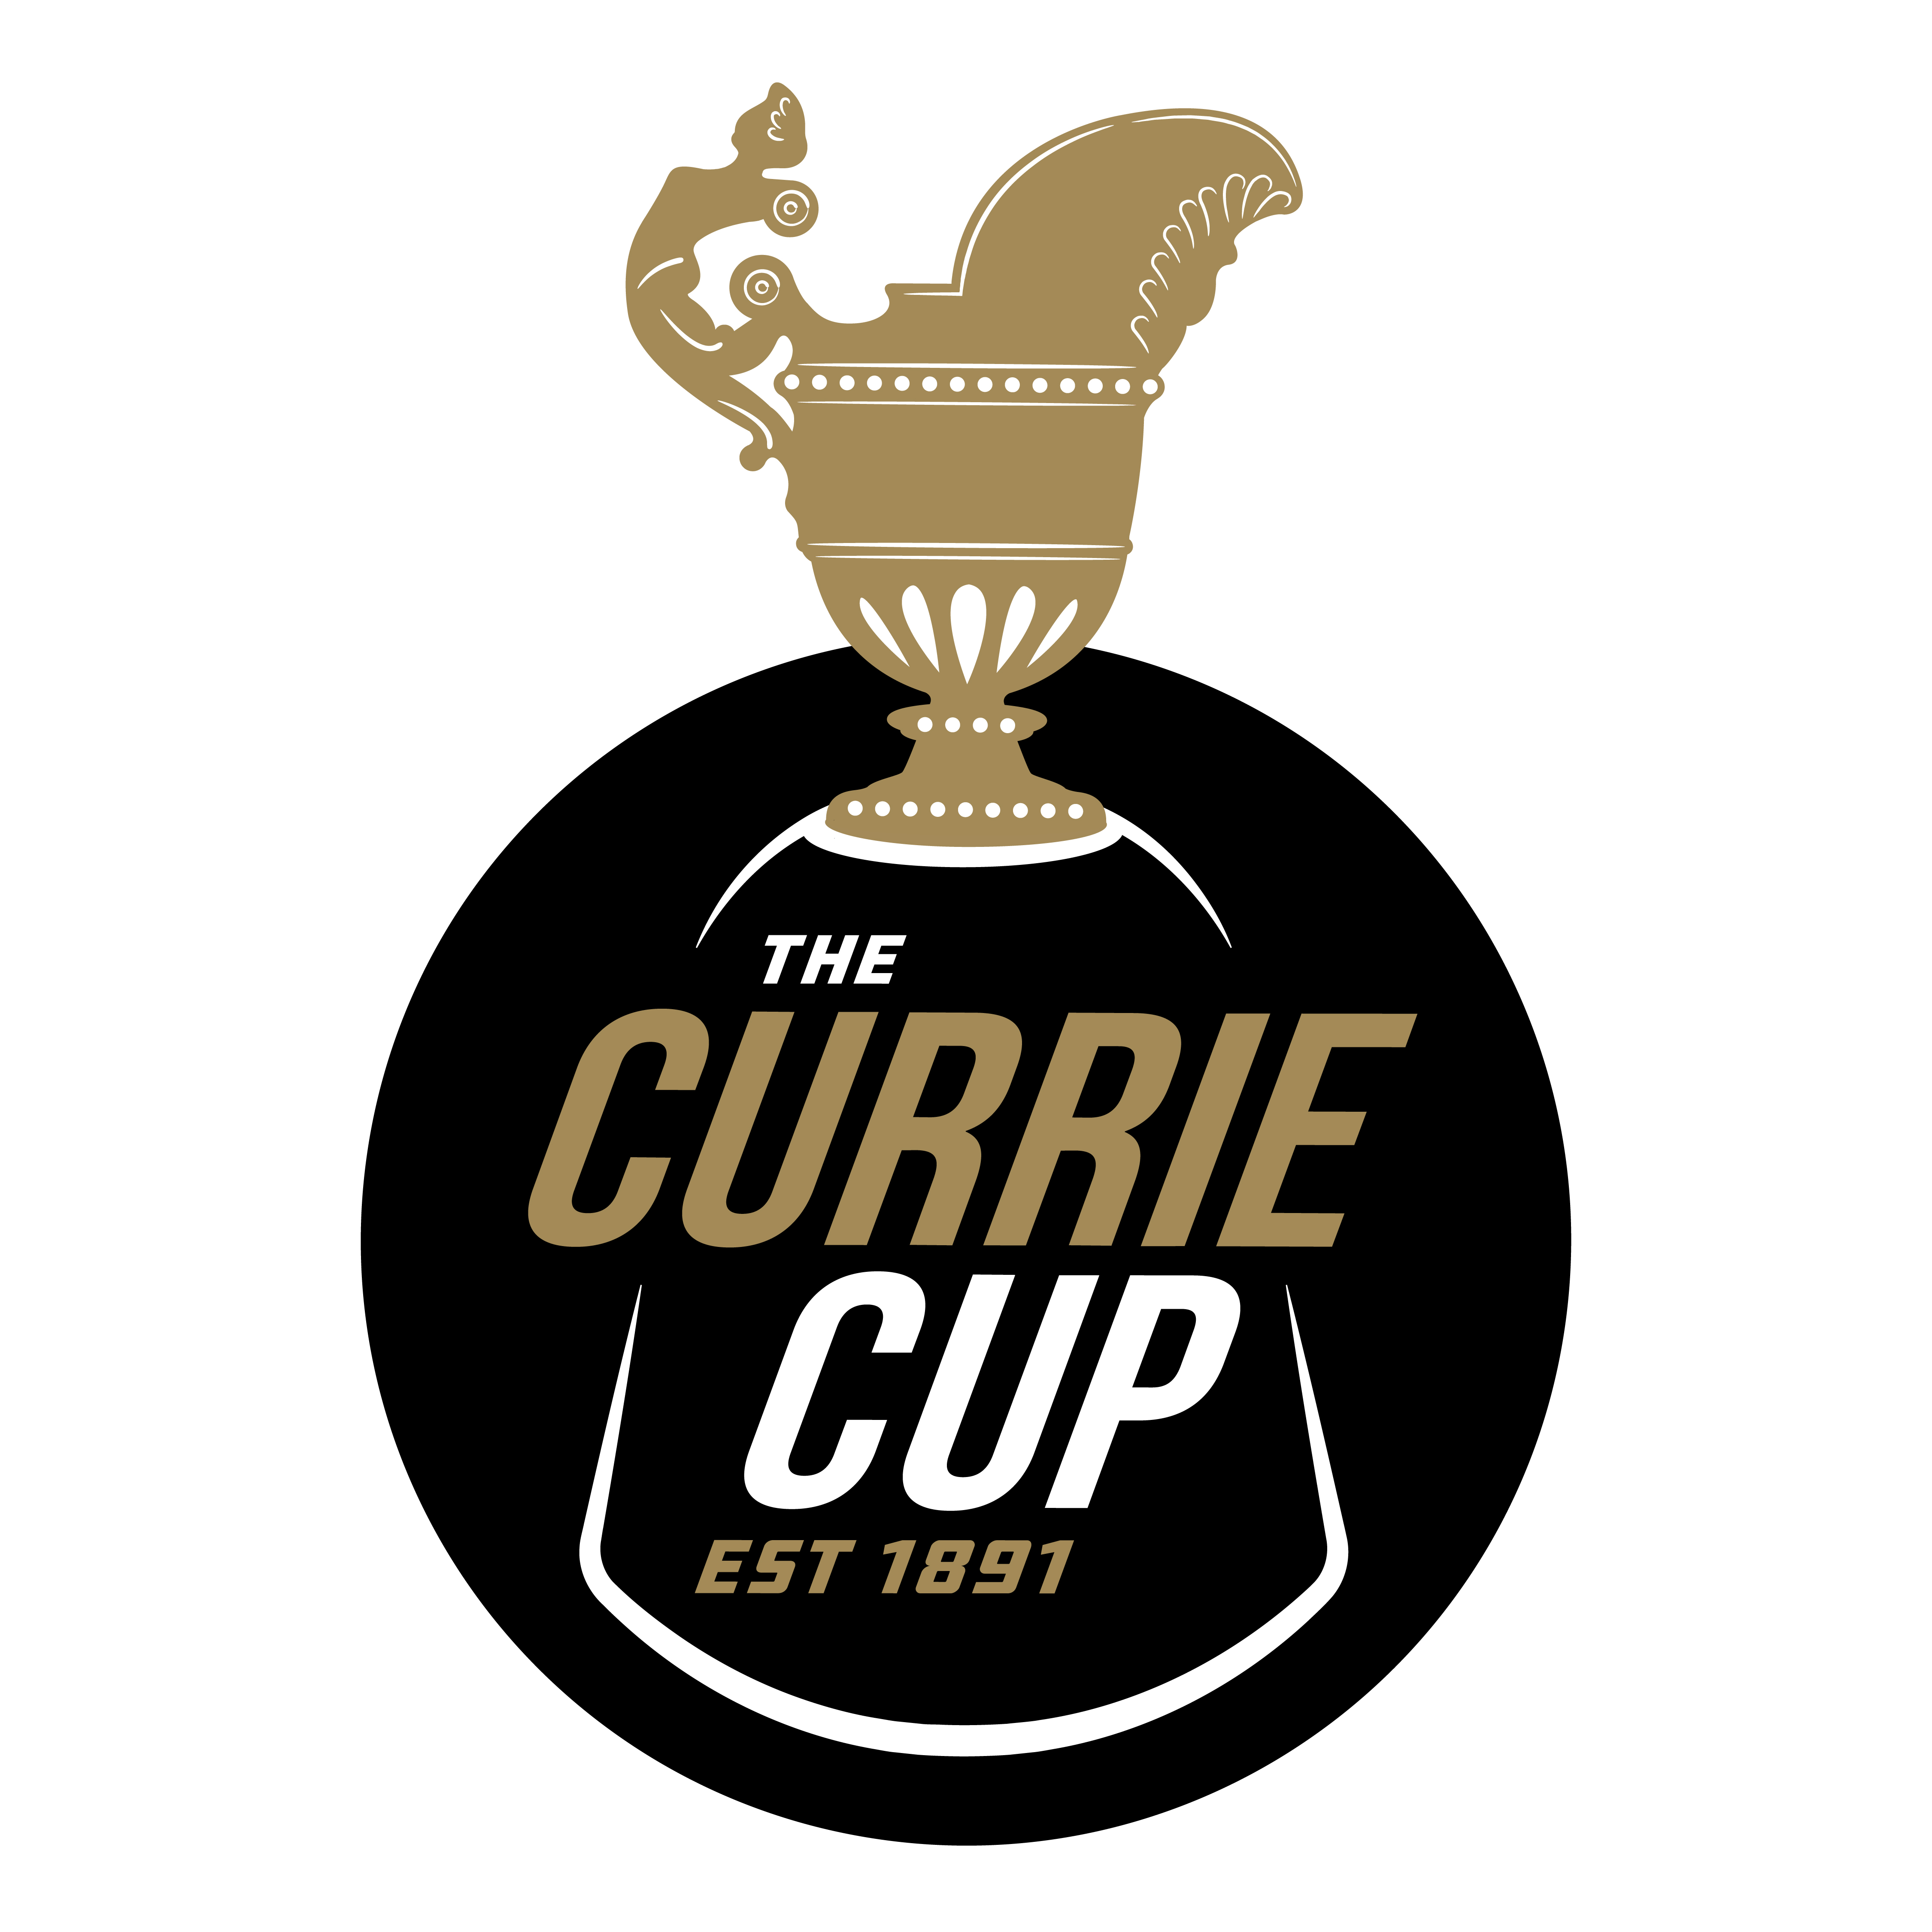 CURRIE CUP PREMIER DIVISION